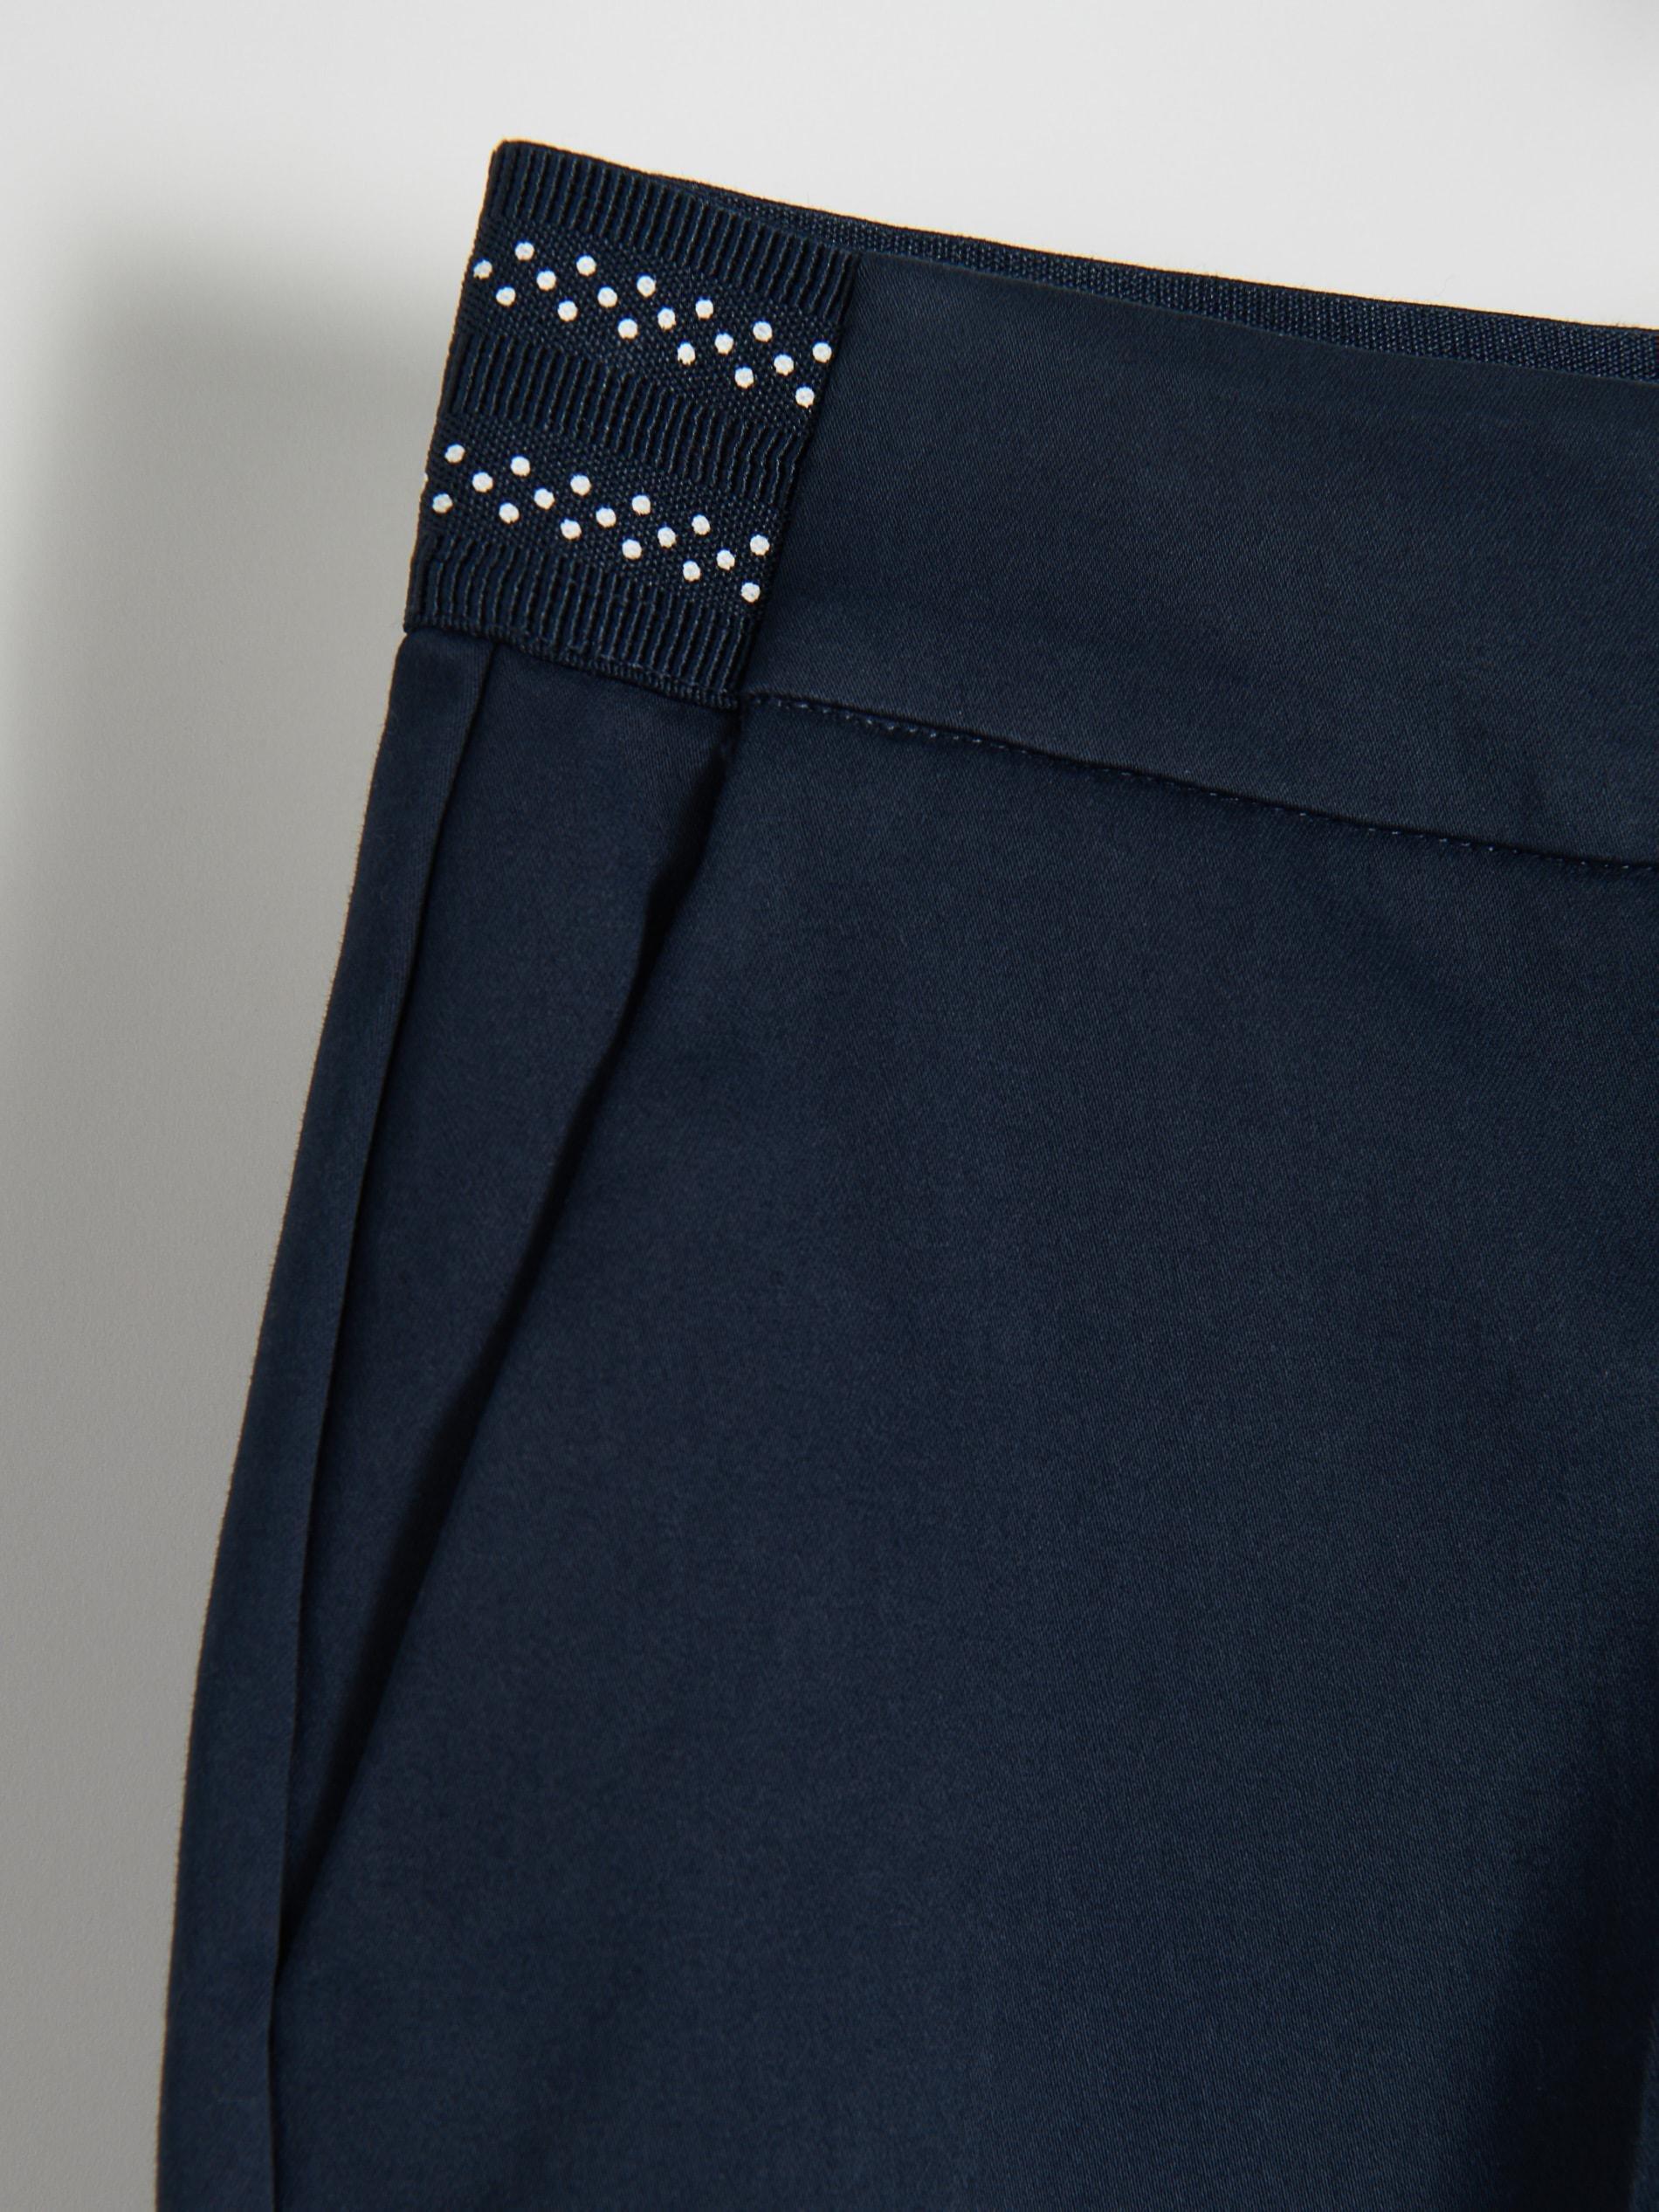 Reserved - Navy Pressed Crease Trousers